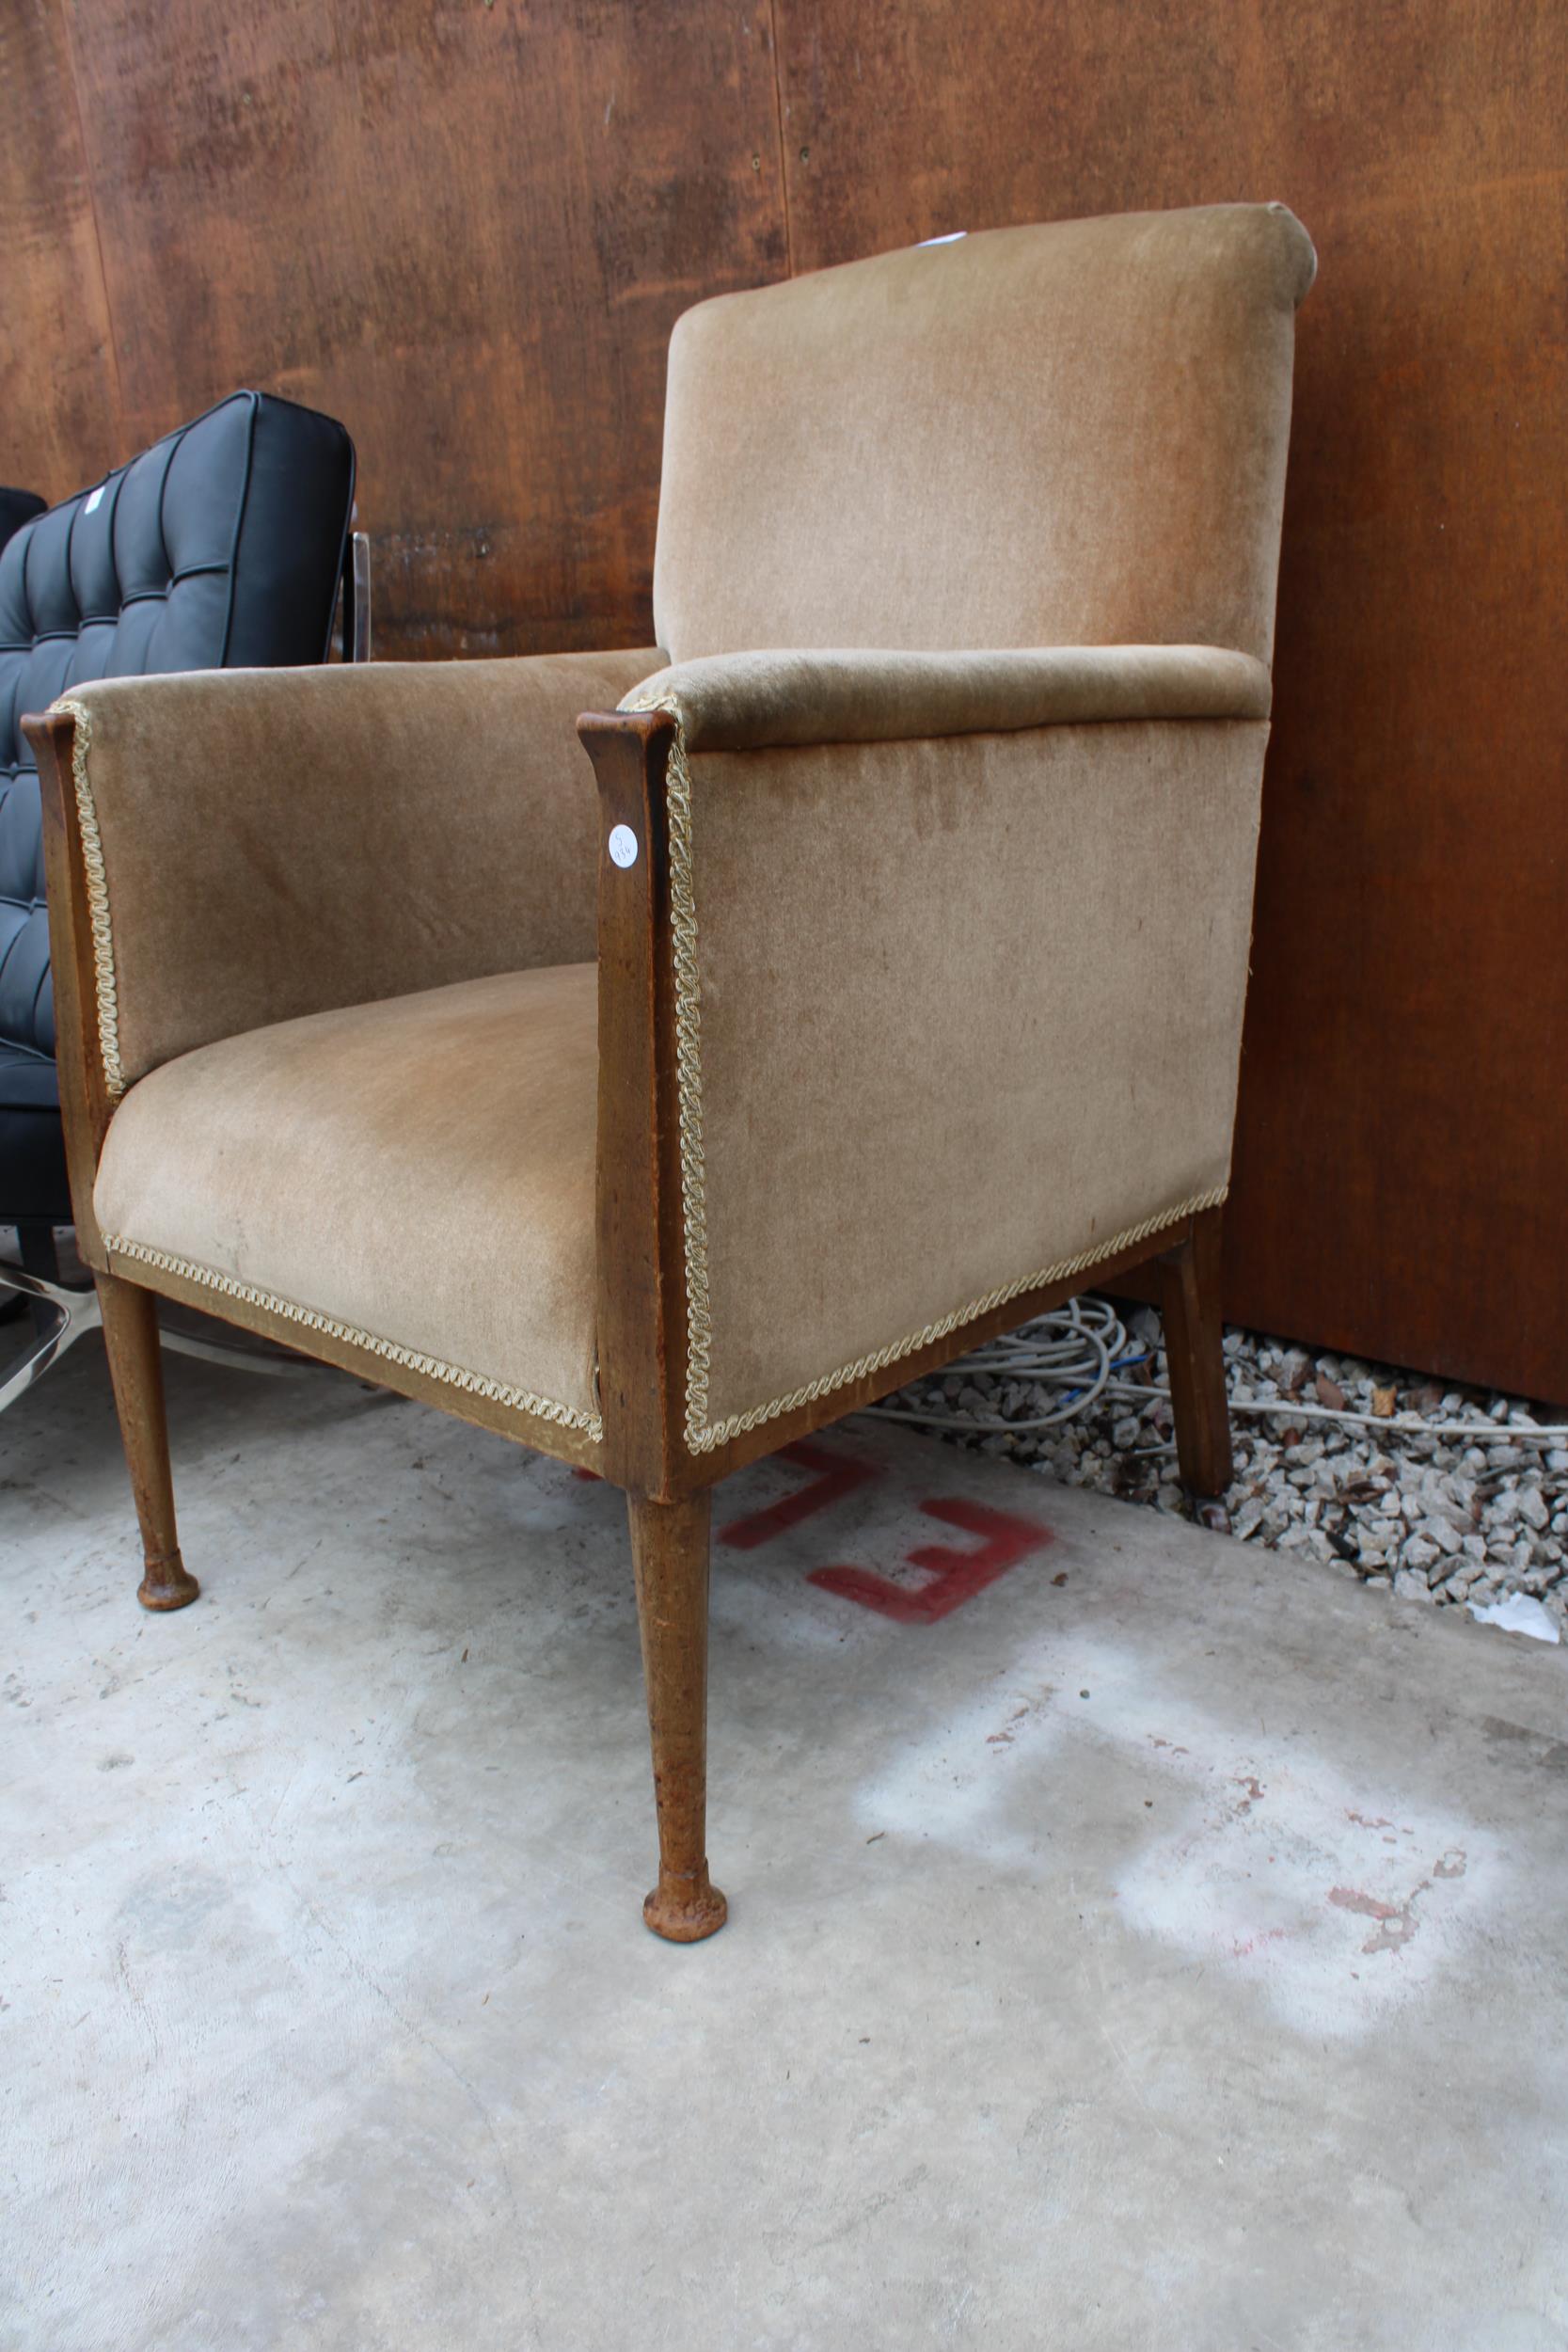 AN EDWARDIAN MAHOGANY UPHOLSTERED FIRESIDE CHAIR ON TAPERING FRONT LEGS - Image 2 of 2